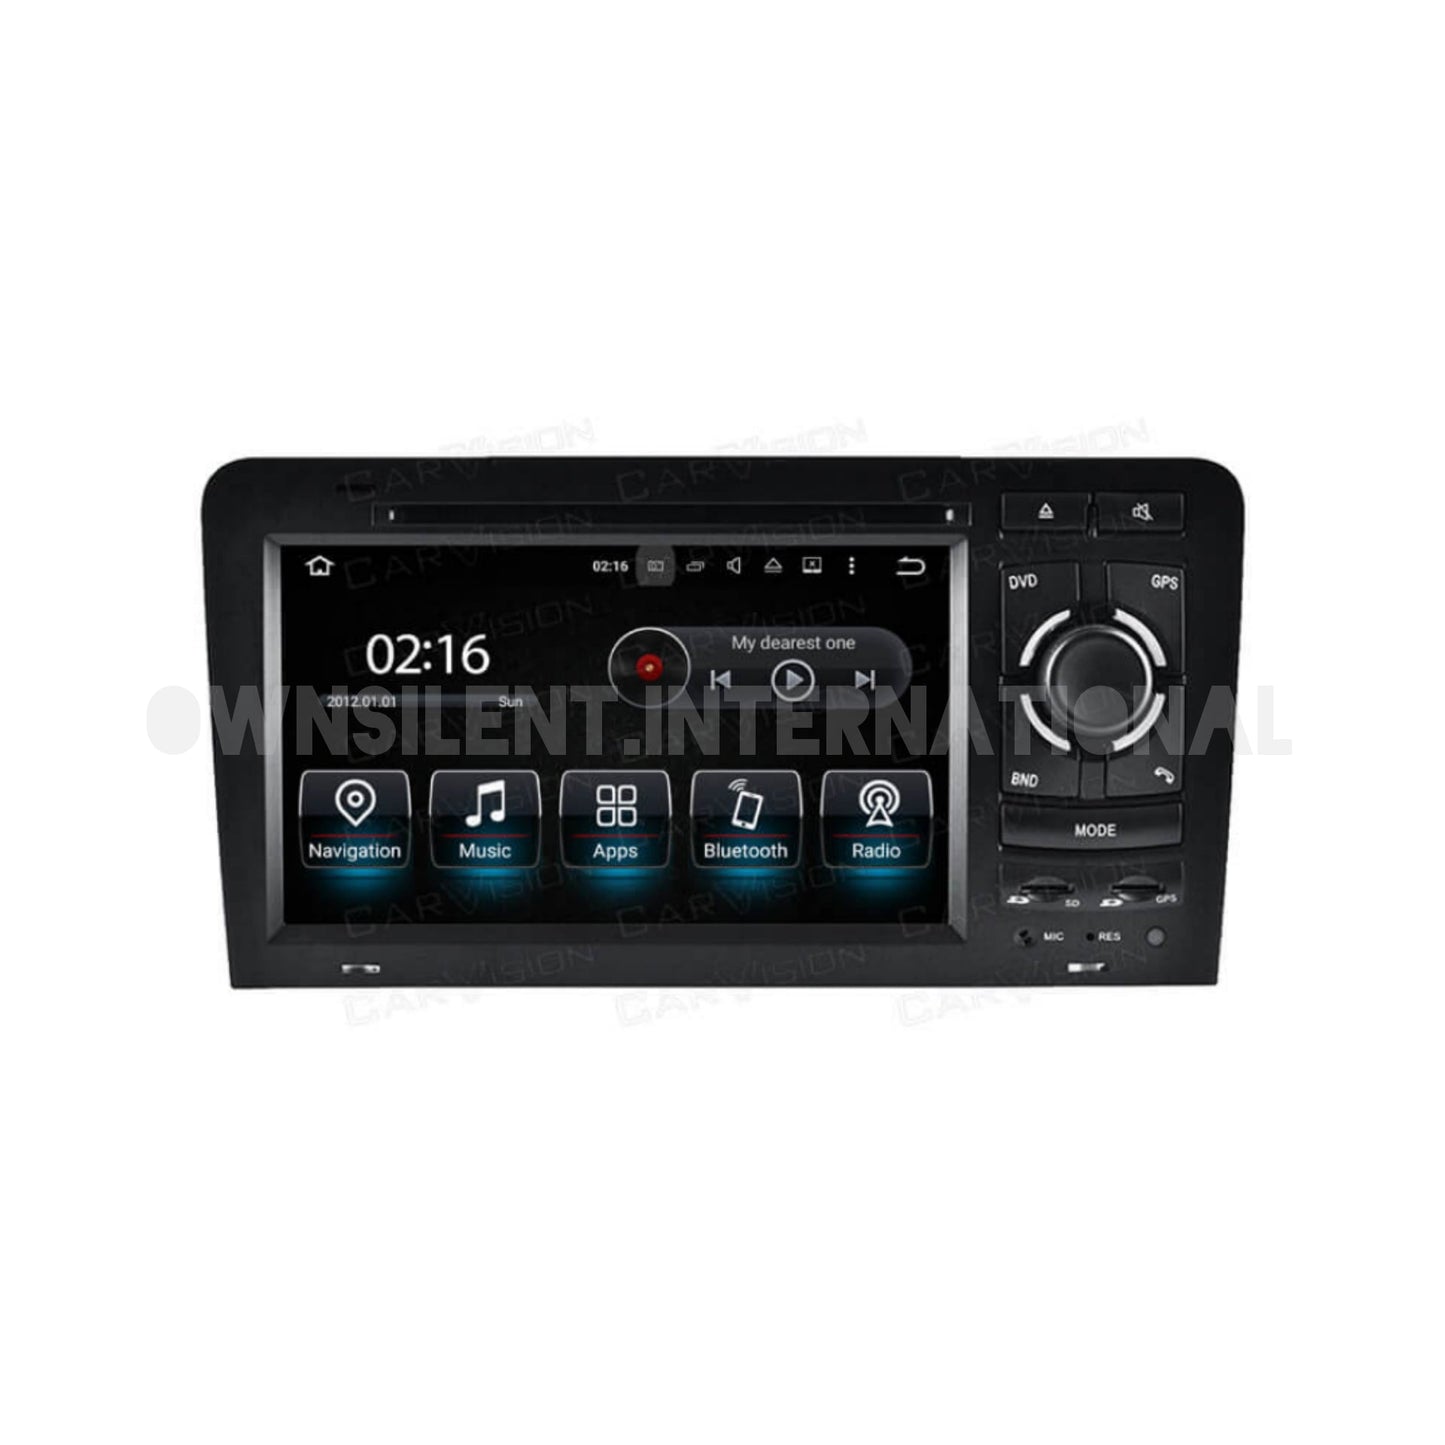 AUDI A3 / S3 2003-2011 ANDROID MONITOR FULL TOUCH

Carplay DSP Music